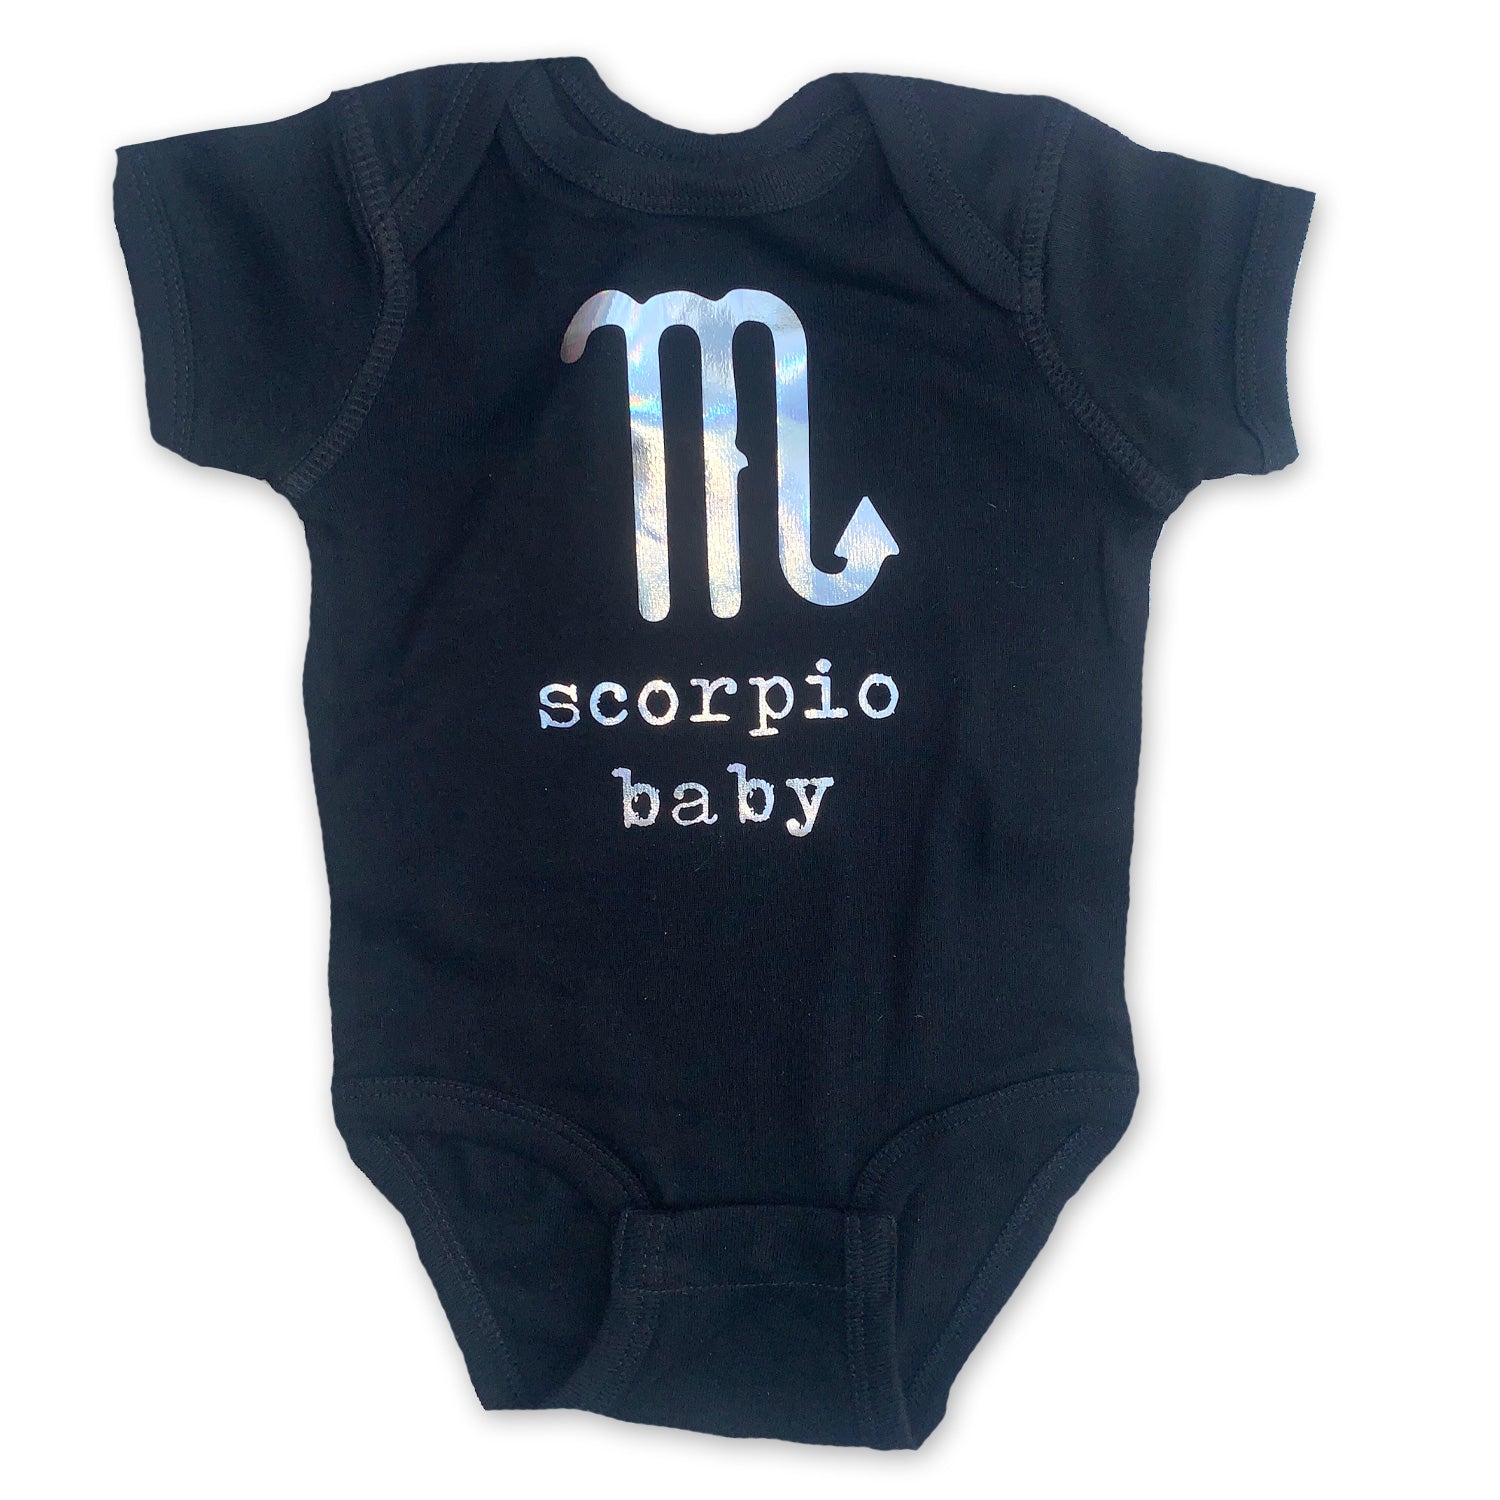 Sol Baby Silver Foil Zodiac Black Bodysuit for $18.00 now at Sol Baby!